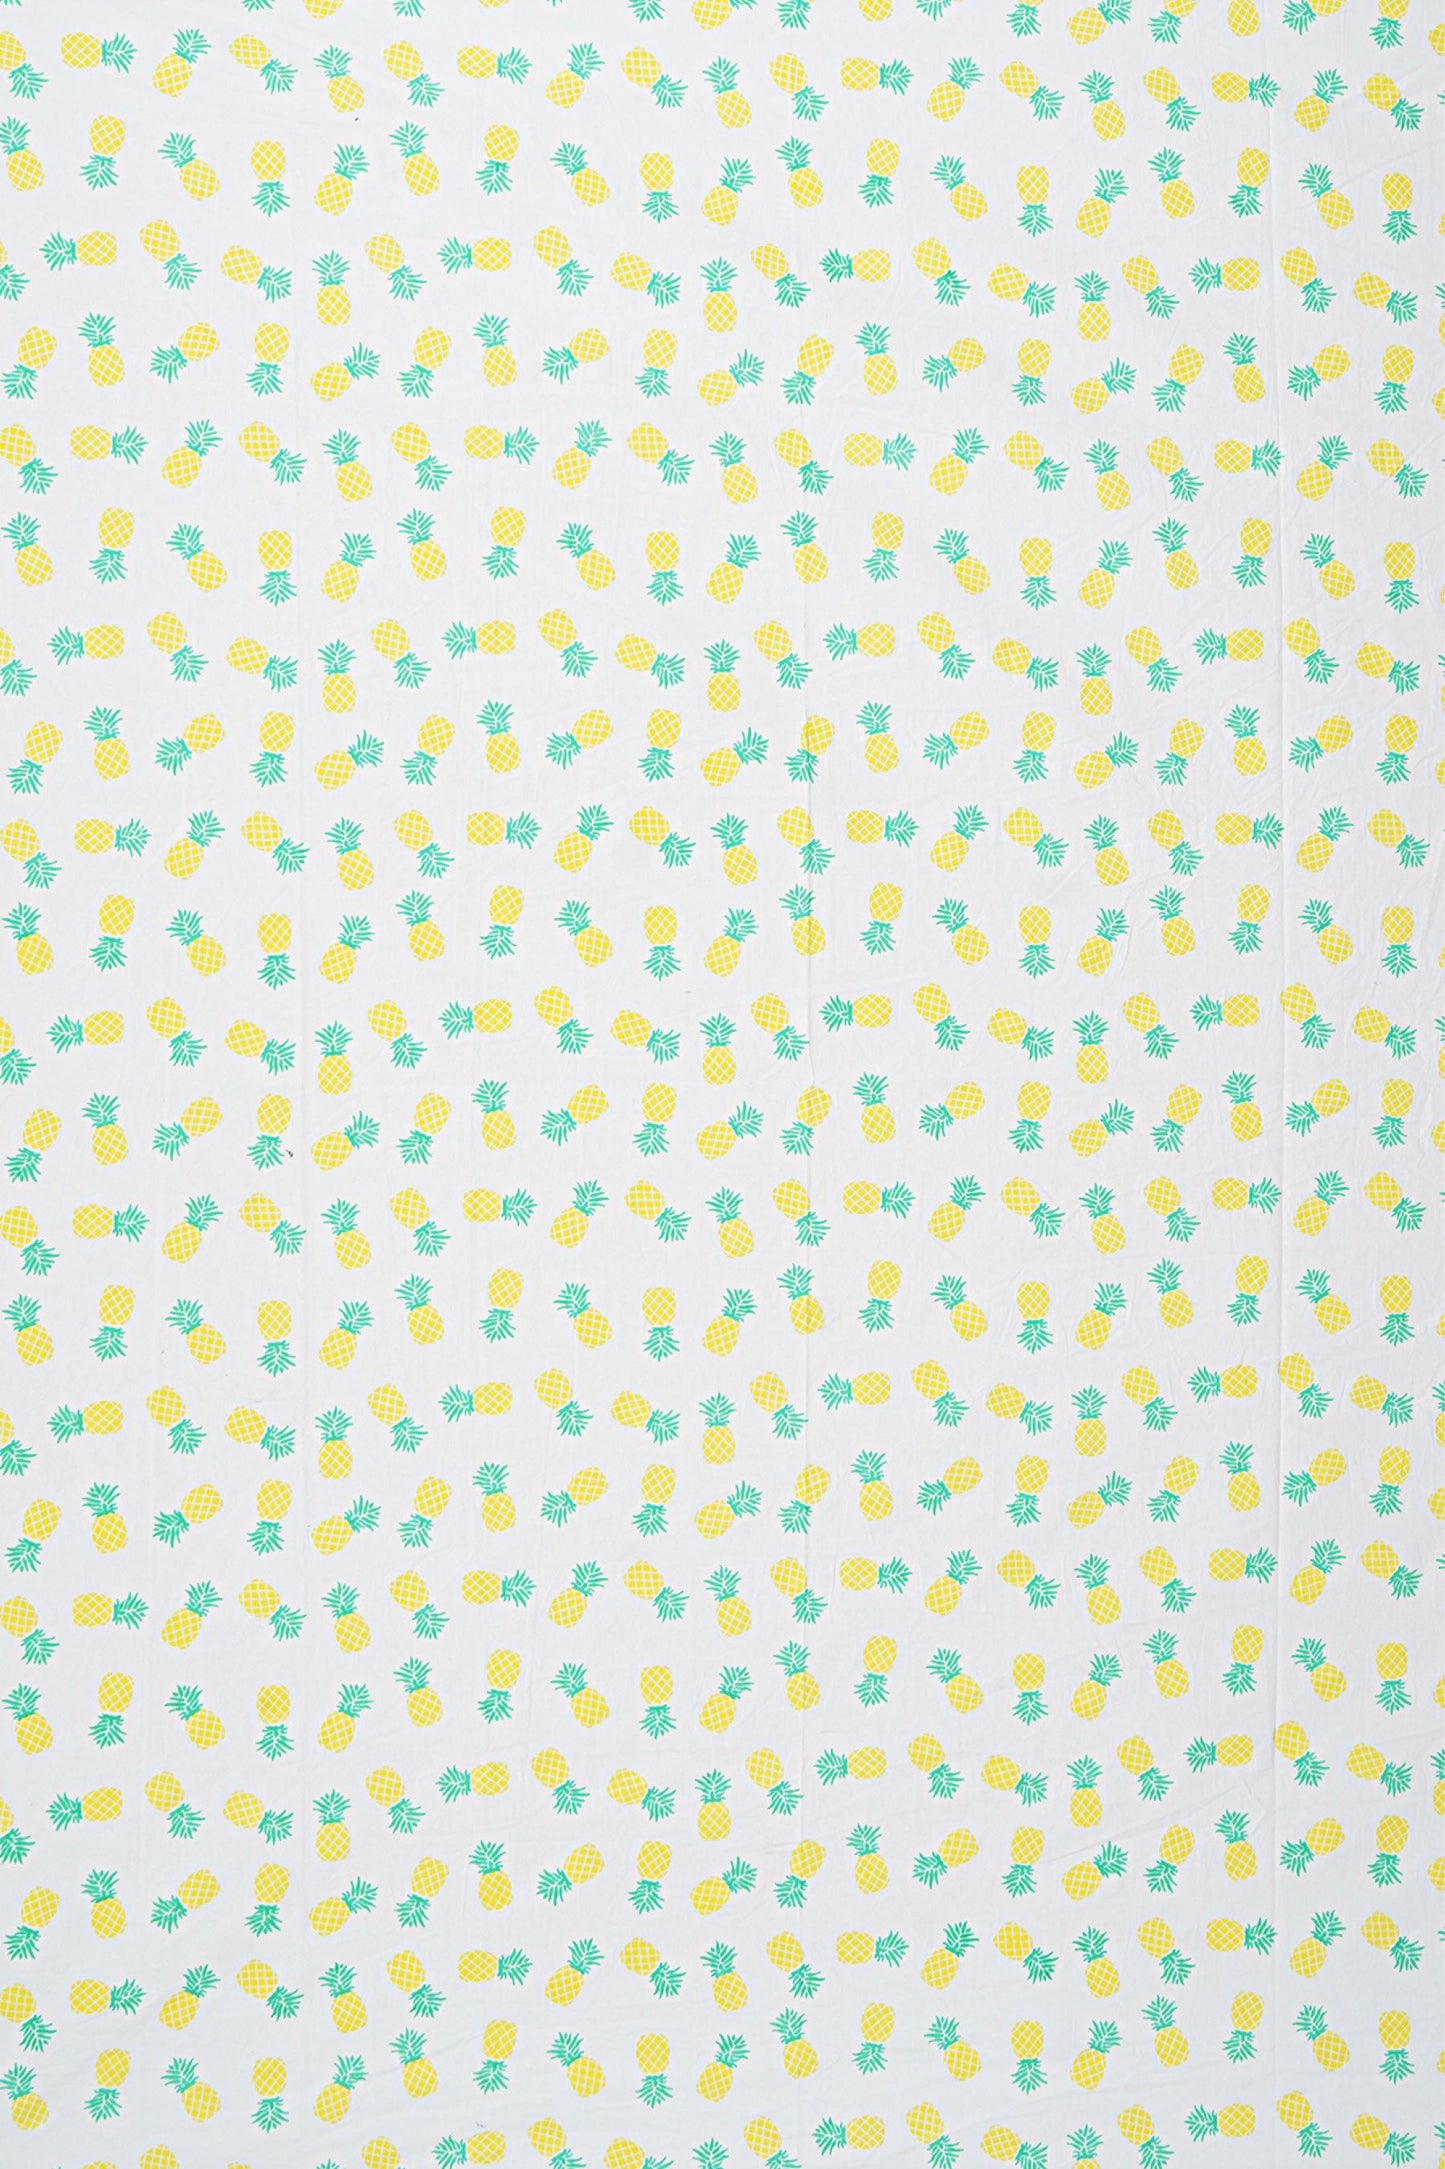 Kids Cotton Bedroom Linens - Double Sheet with 2 Pillow Covers in Pineapple Print - King Size Bed